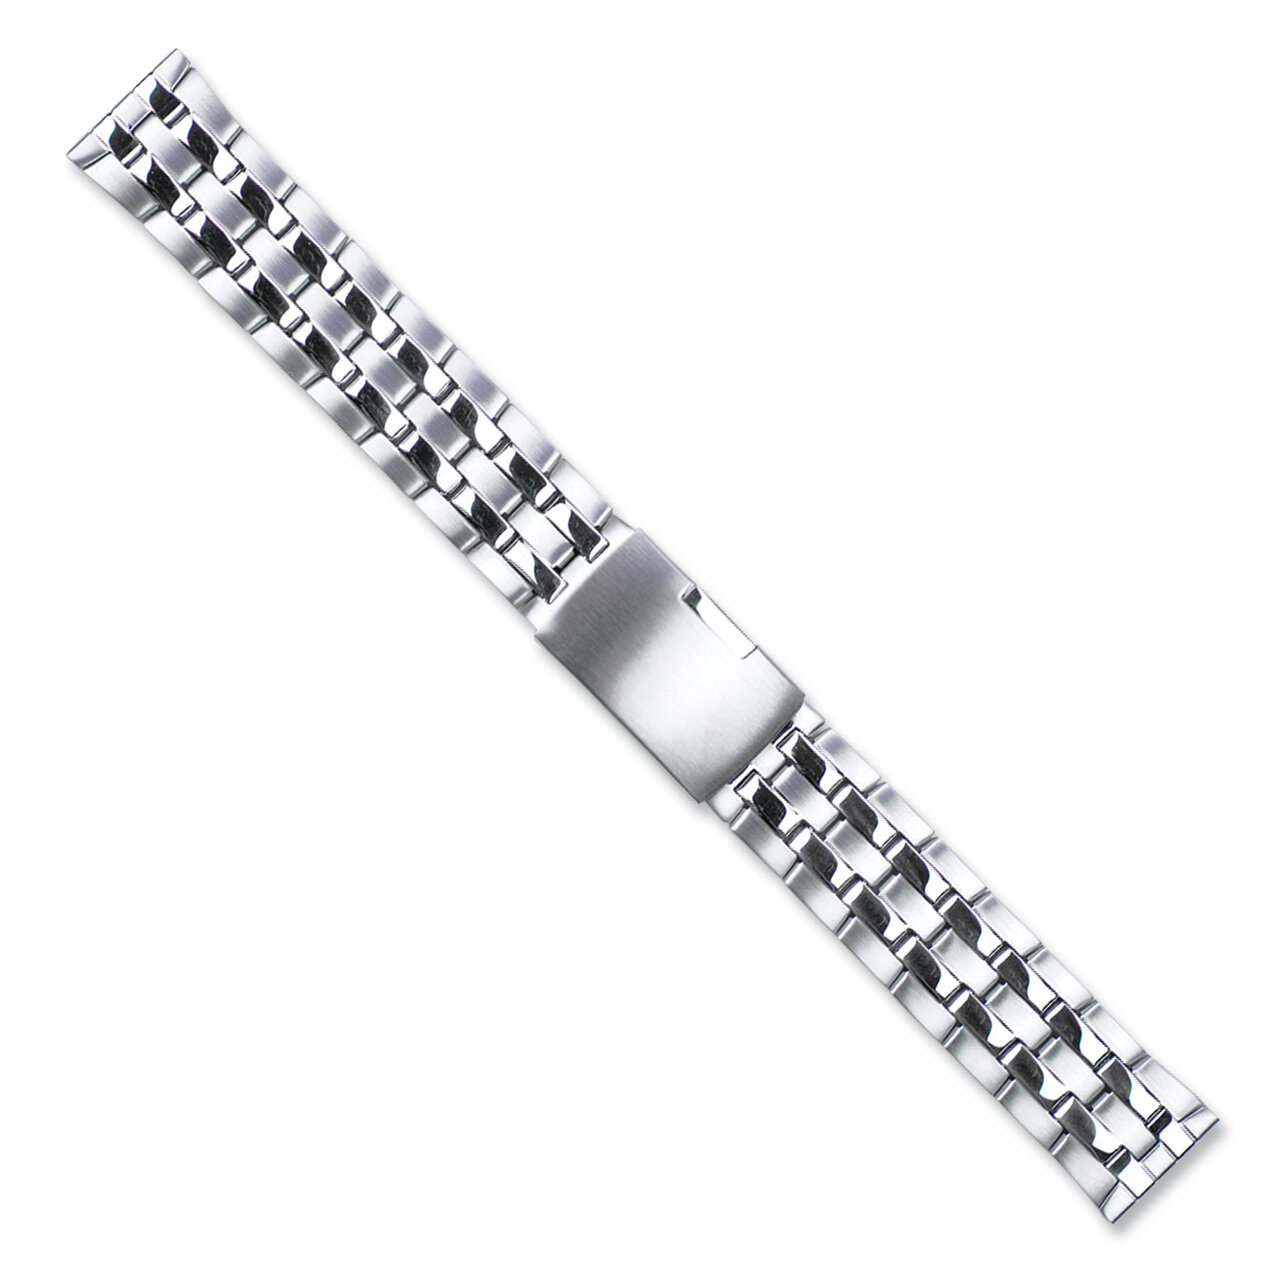 18mm Stainless Steel Push-Button Deployment Watch Band BA423-18